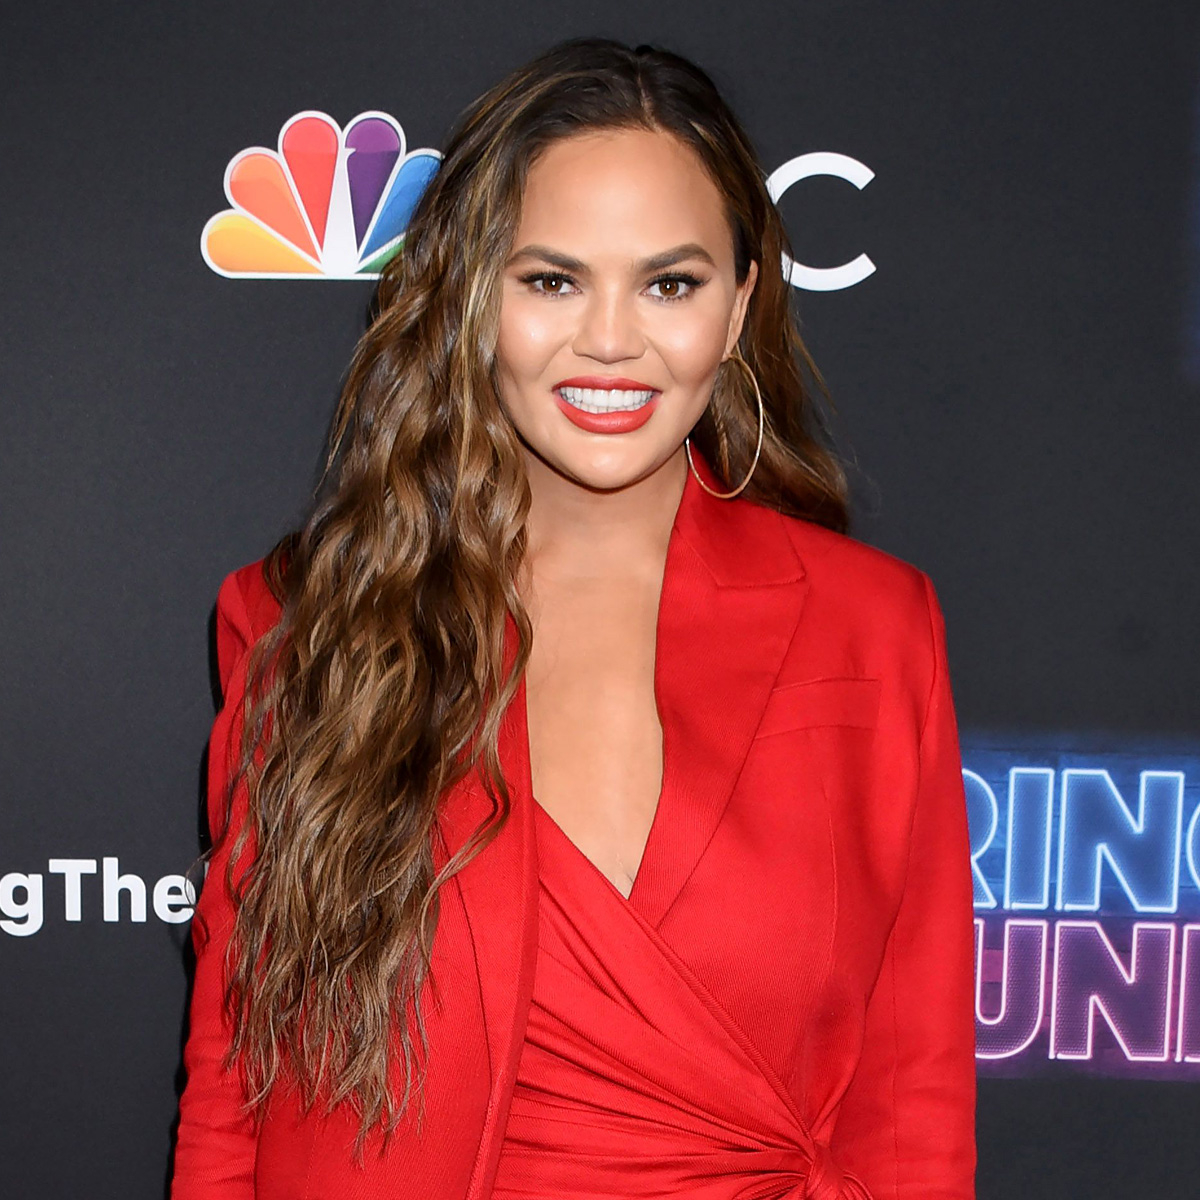 Chrissy Teigen Believed She Had Identical Twin After DNA Test Mishap